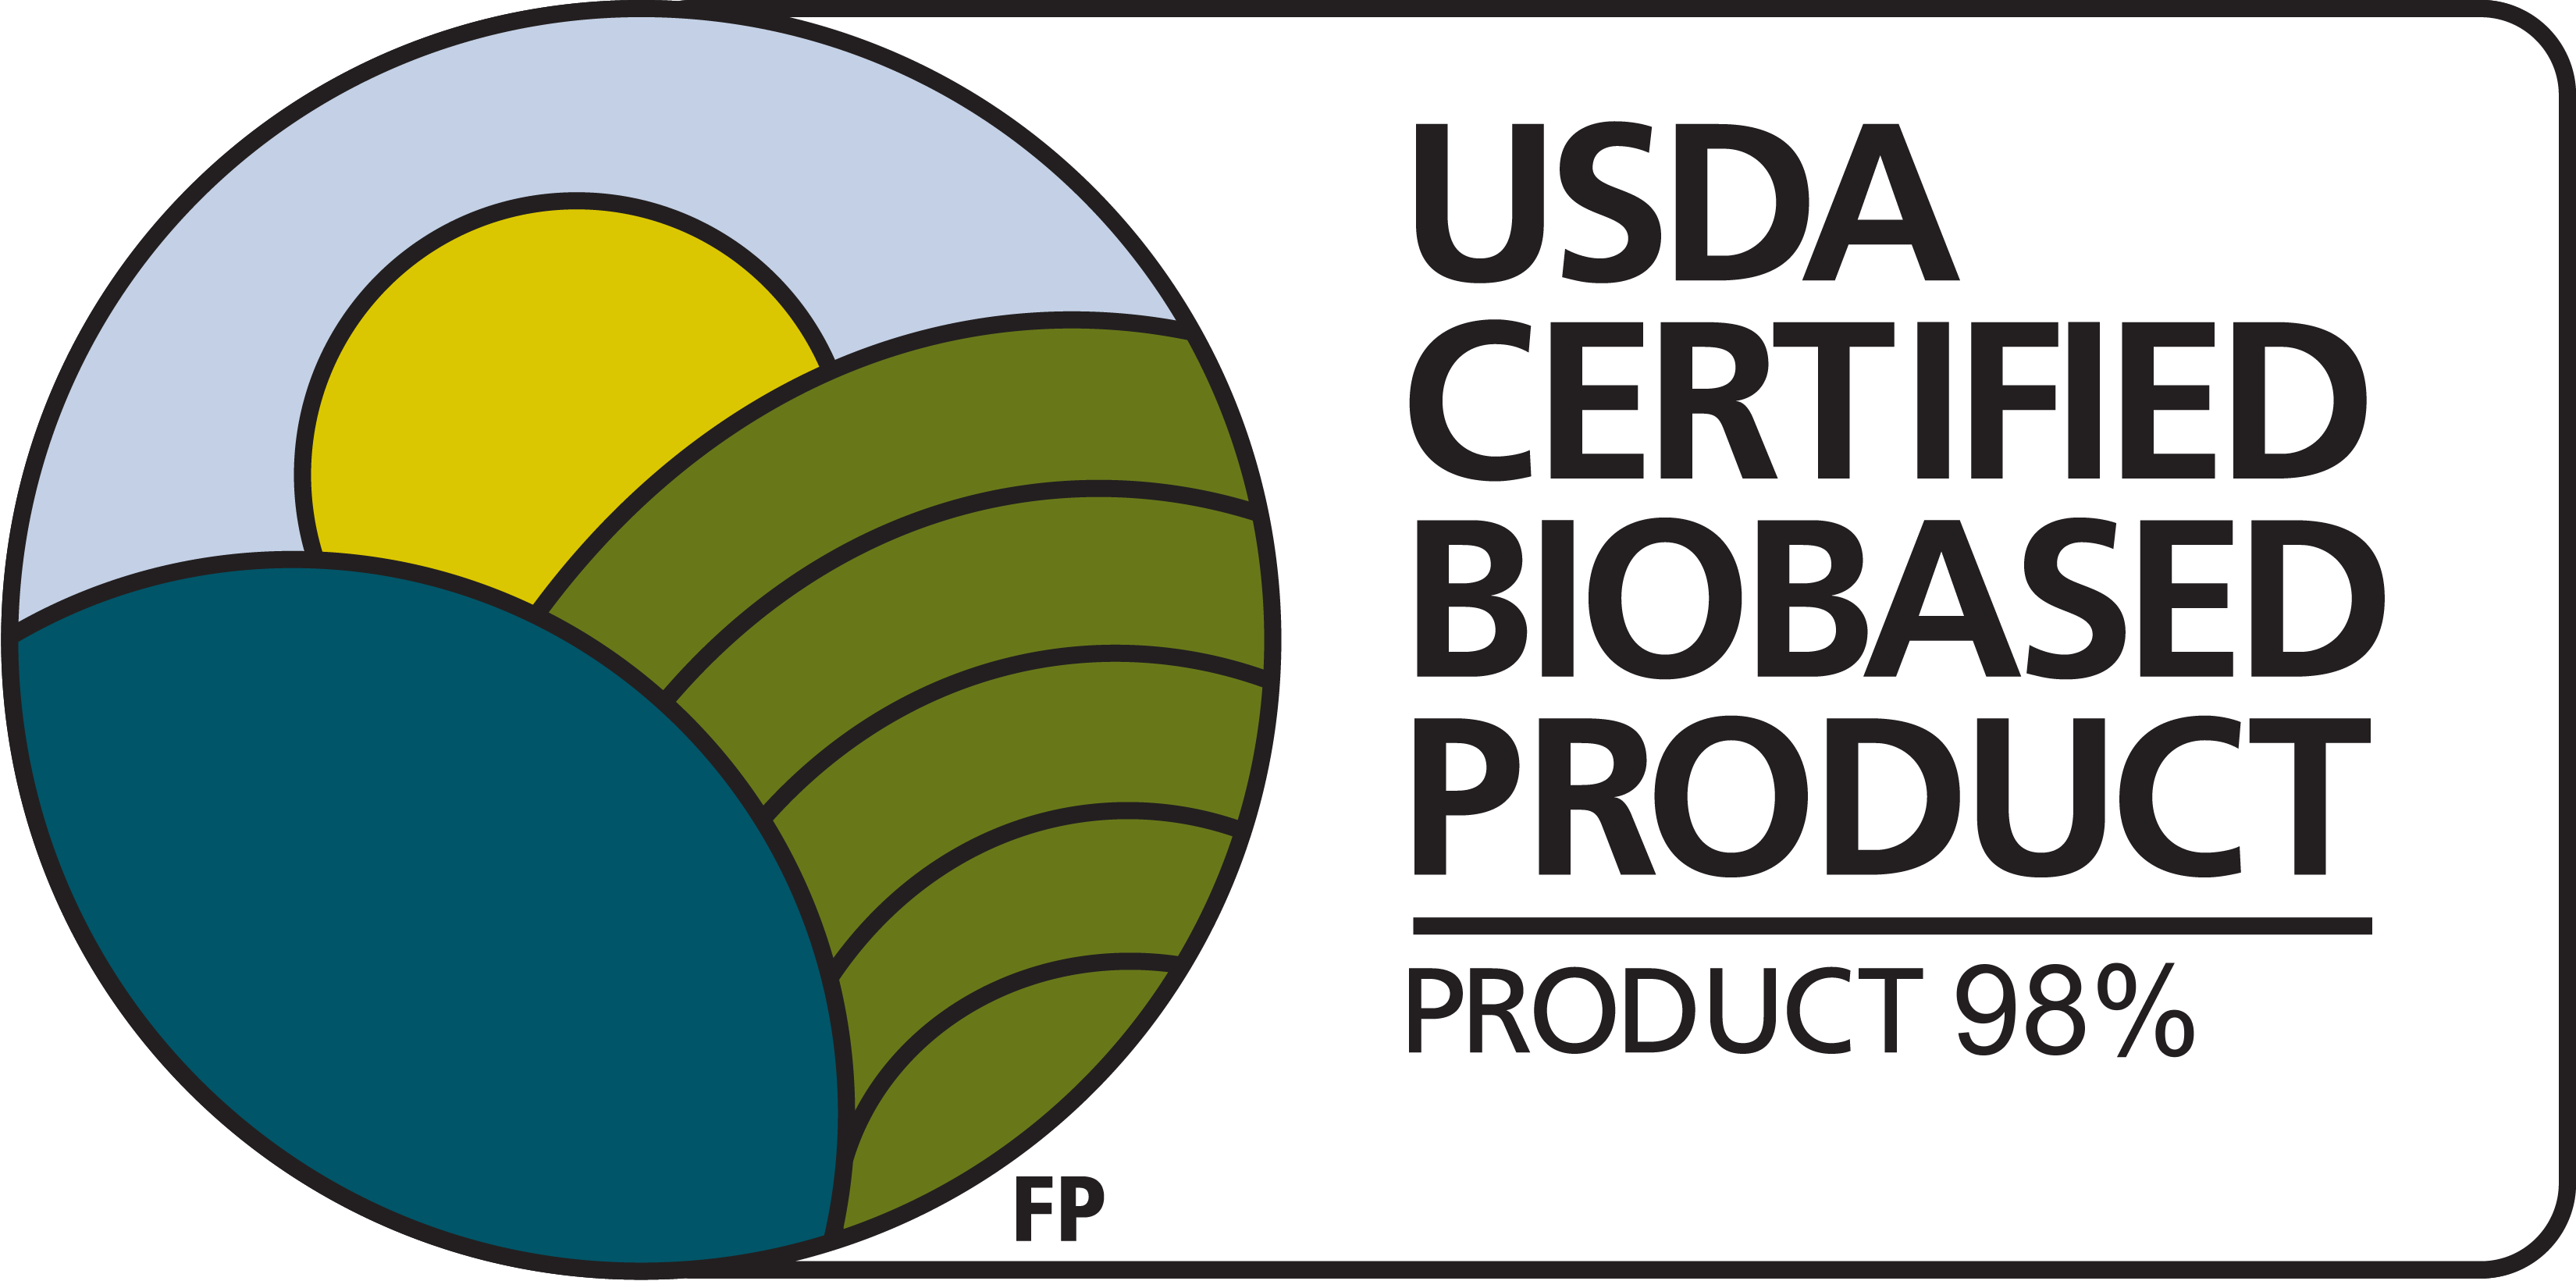 USDA Certified Biobased Product Label for Honest Organic All Purpose Balm